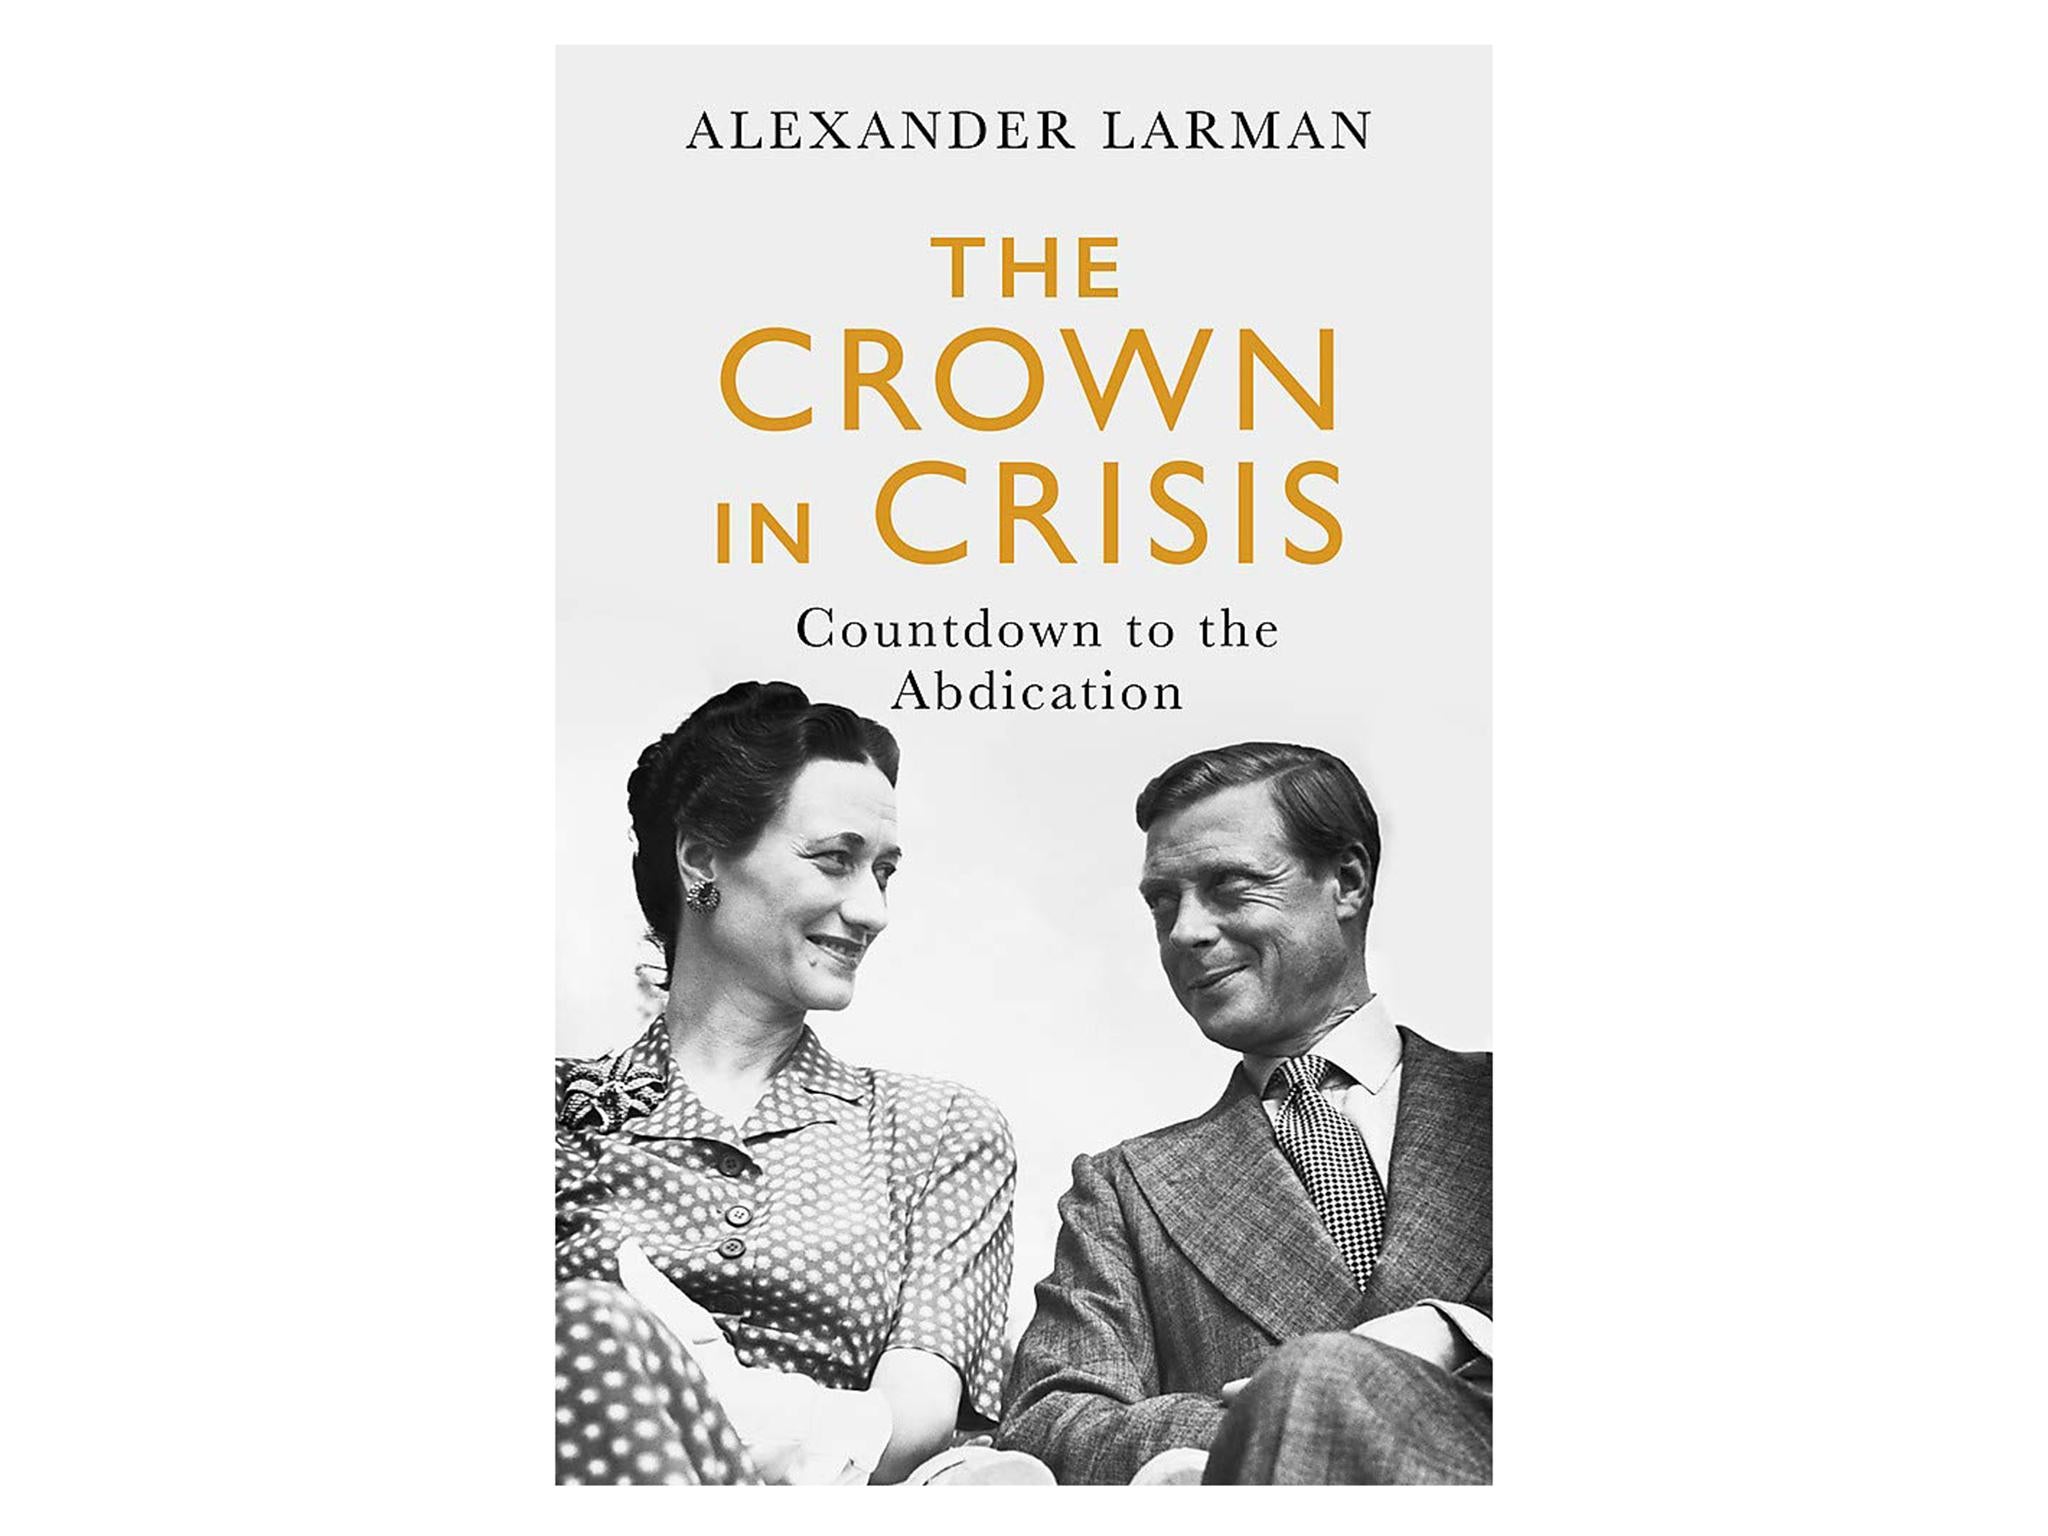 crown-in-crisis-indybest-best-royal-abdication-books.jpg